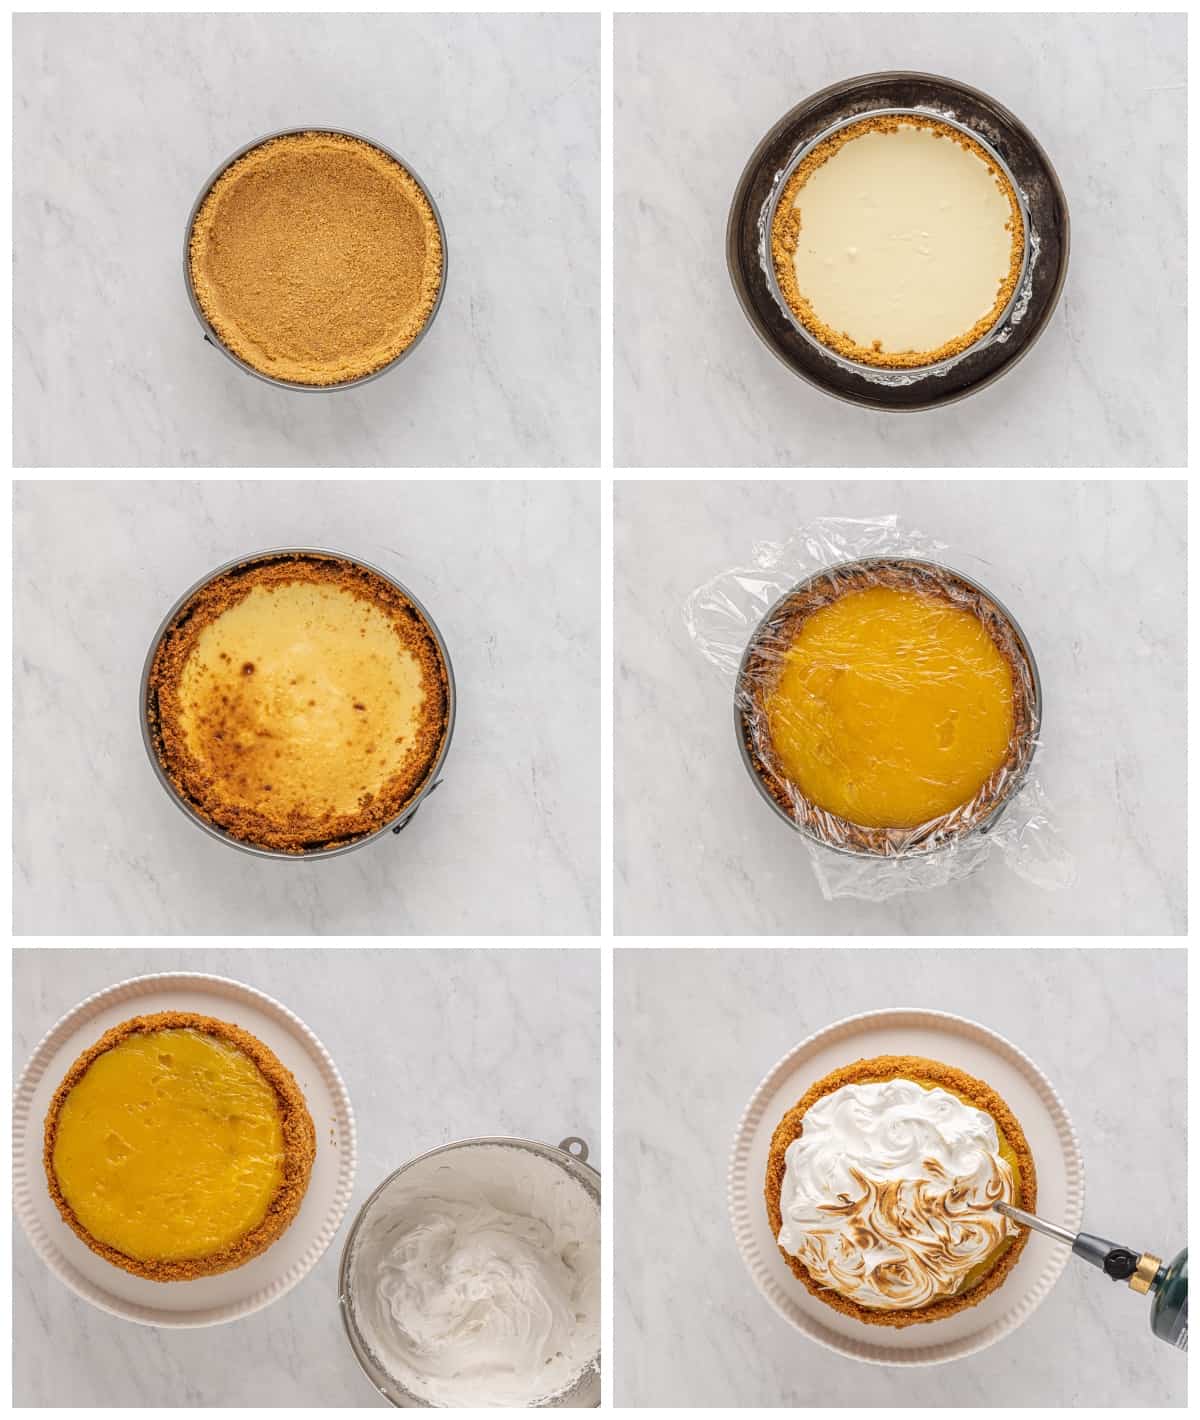 how to make lemon meringue cheesecake step by step photo instructions